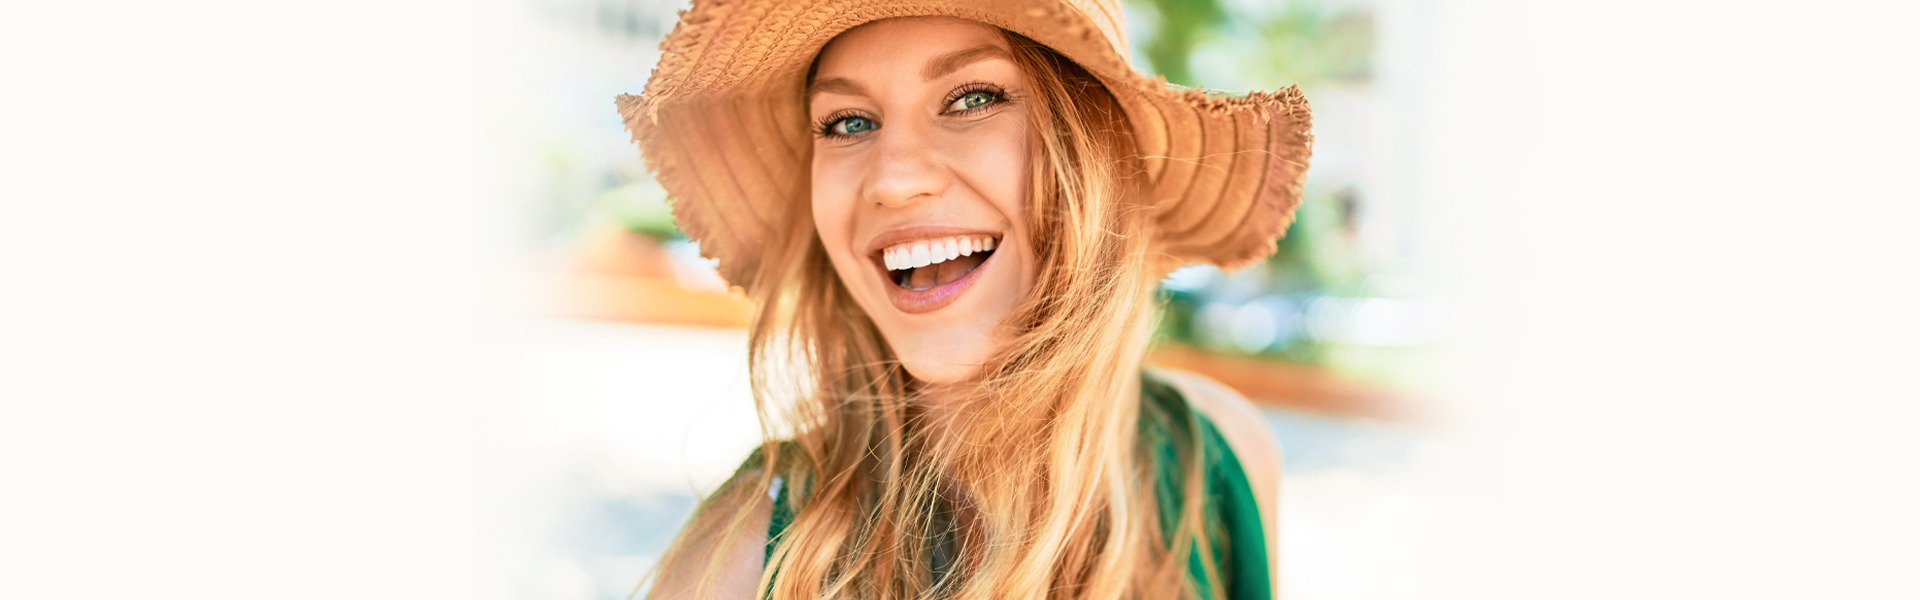 9 Dental Facts You Should Know About Teeth Whitening